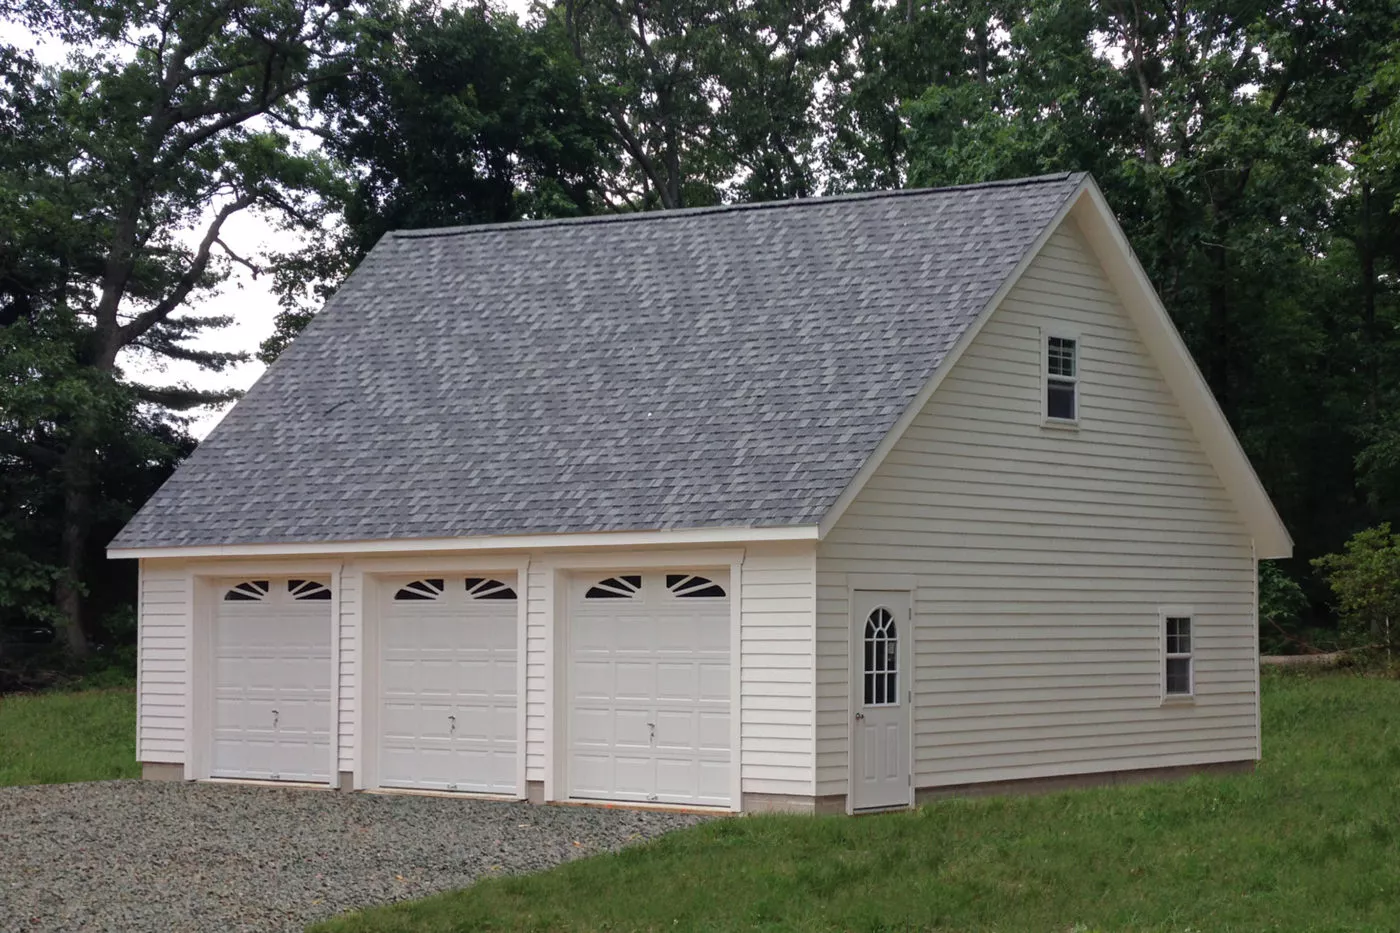 How Much Does A Detached Garage Cost, Cost Per Sq Ft To Build Finished Garage